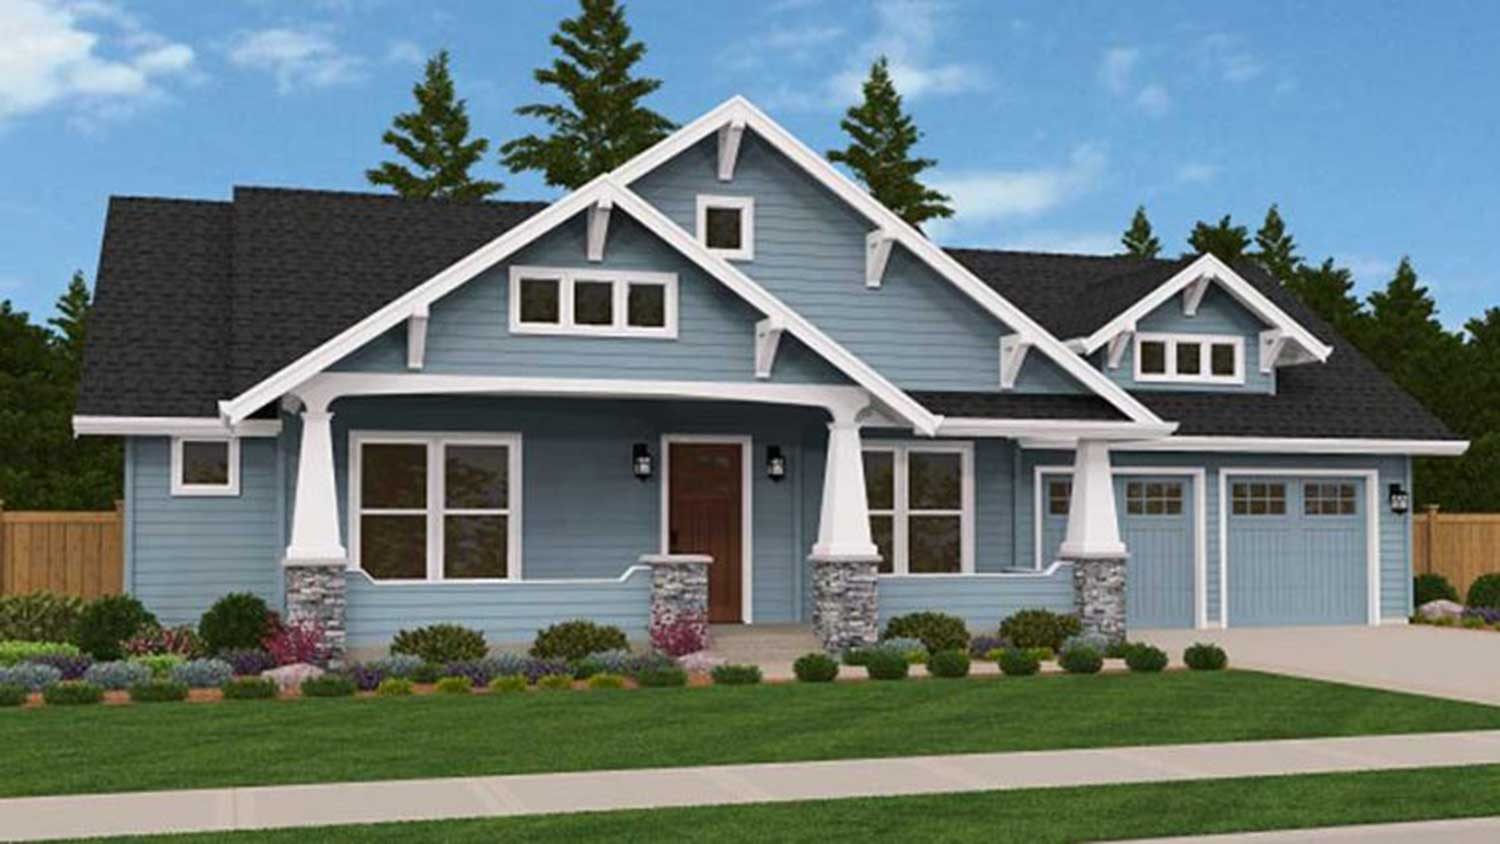 Rendering of the Chesterton home by Kingston Homes